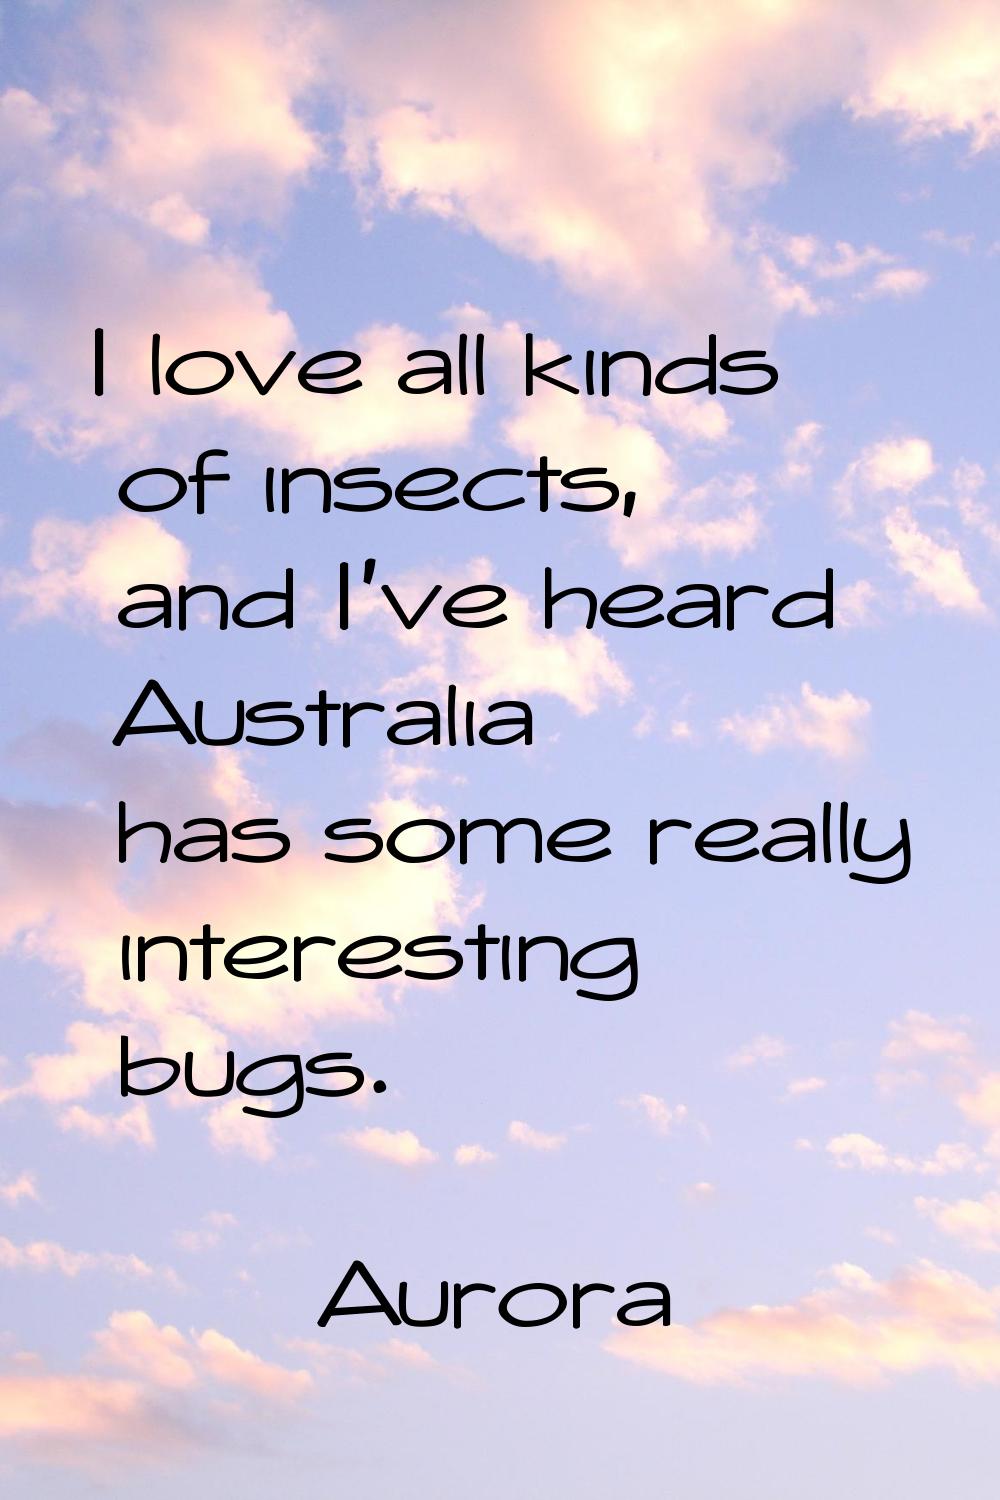 I love all kinds of insects, and I've heard Australia has some really interesting bugs.